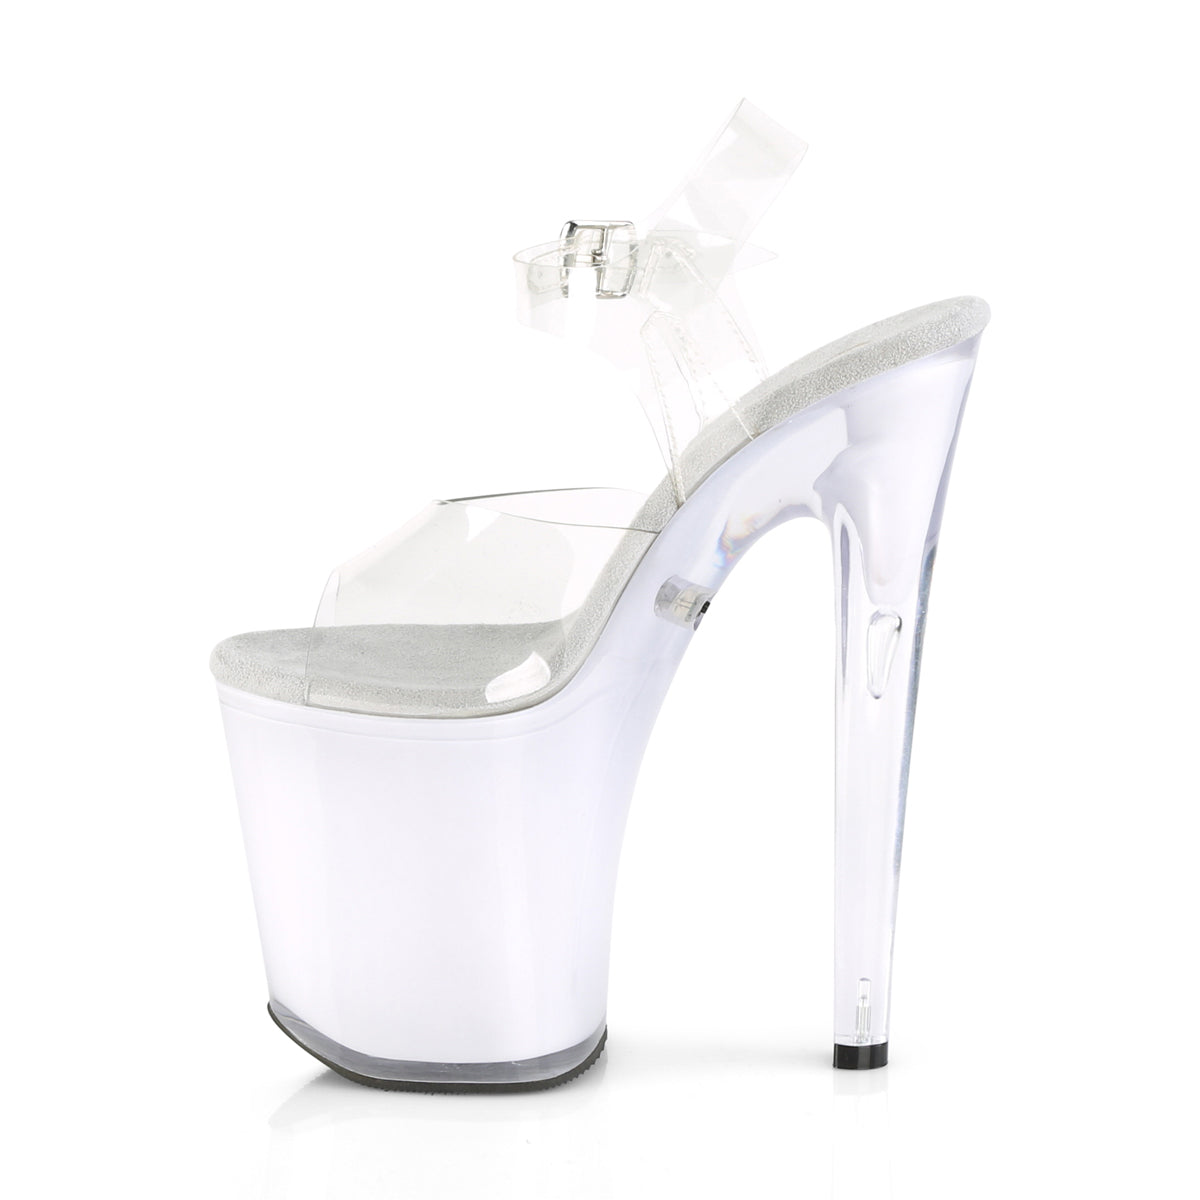 DISCOLITE-808 8" Clear and White Glow Pole Dancer Platforms-Pleaser- Sexy Shoes Pole Dance Heels